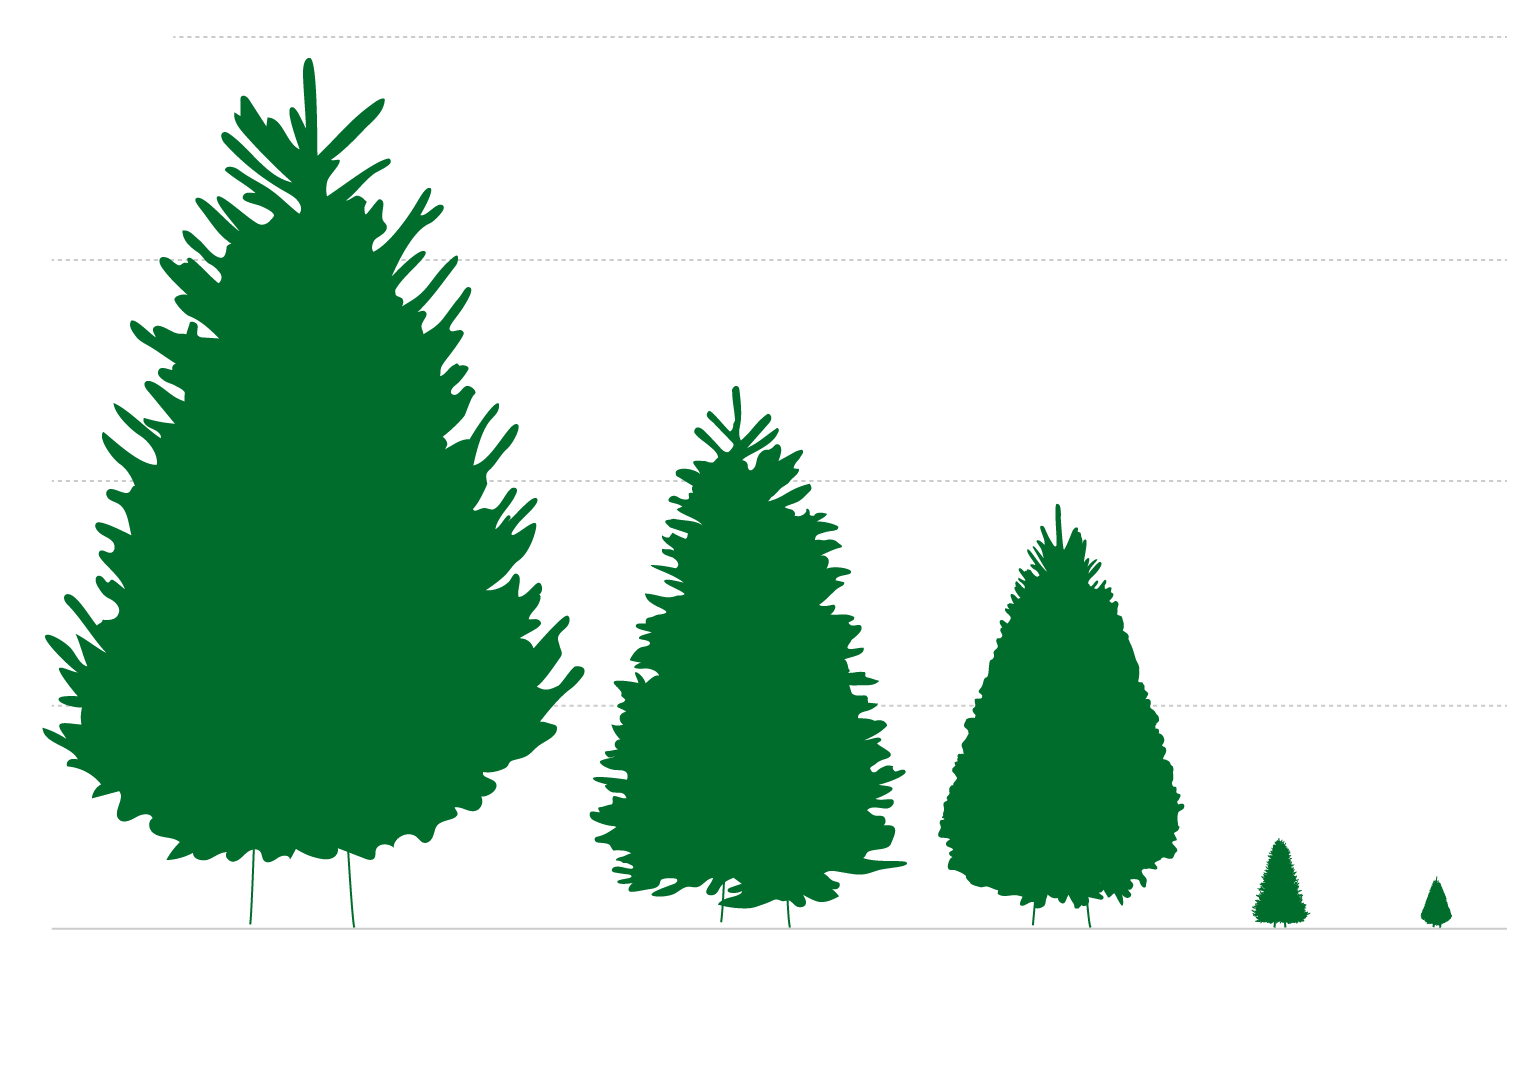 Oh, Christmas tree: The economics of the US holiday tree industry